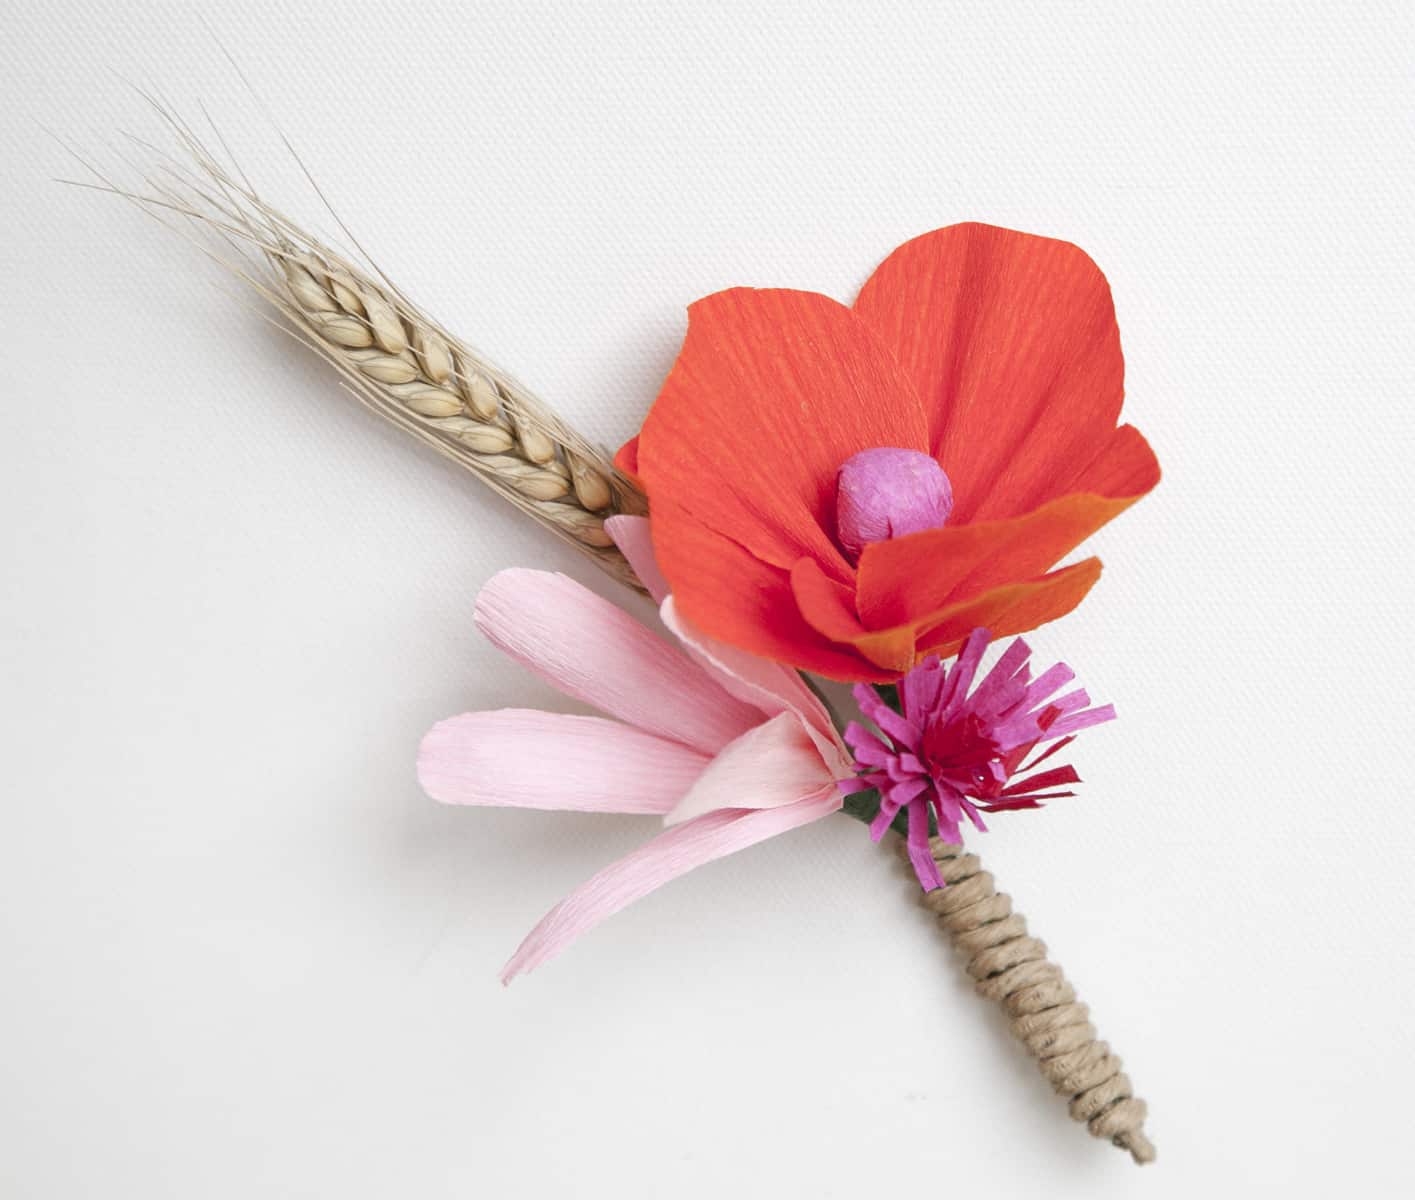 How to make a crepe paper flower